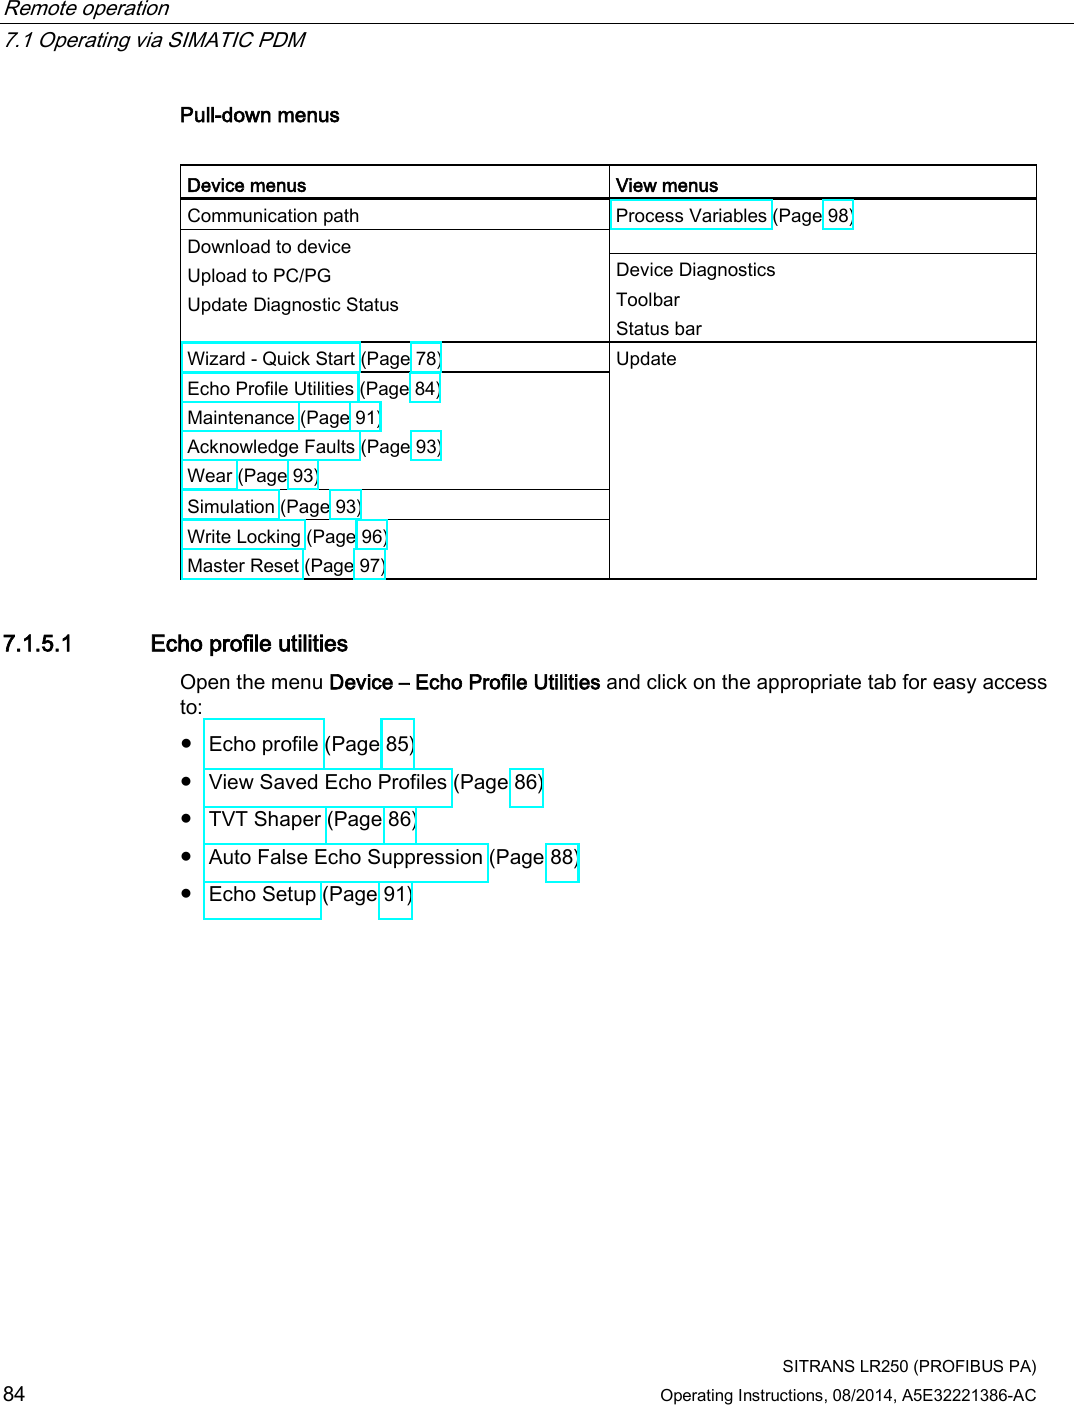 Remote operation   7.1 Operating via SIMATIC PDM  SITRANS LR250 (PROFIBUS PA) 84 Operating Instructions, 08/2014, A5E32221386-AC Pull-down menus  Device menus View menus Communication path Process Variables (Page 98) Download to device Upload to PC/PG Update Diagnostic Status Device Diagnostics Toolbar Status bar Wizard - Quick Start (Page 78)  Update Echo Profile Utilities (Page 84) Maintenance (Page 91) Acknowledge Faults (Page 93) Wear (Page 93) Simulation (Page 93) Write Locking (Page 96) Master Reset (Page 97) 7.1.5.1 Echo profile utilities Open the menu Device – Echo Profile Utilities and click on the appropriate tab for easy access to: ● Echo profile (Page 85)  ● View Saved Echo Profiles (Page 86) ● TVT Shaper (Page 86)  ● Auto False Echo Suppression (Page 88)  ● Echo Setup (Page 91) 